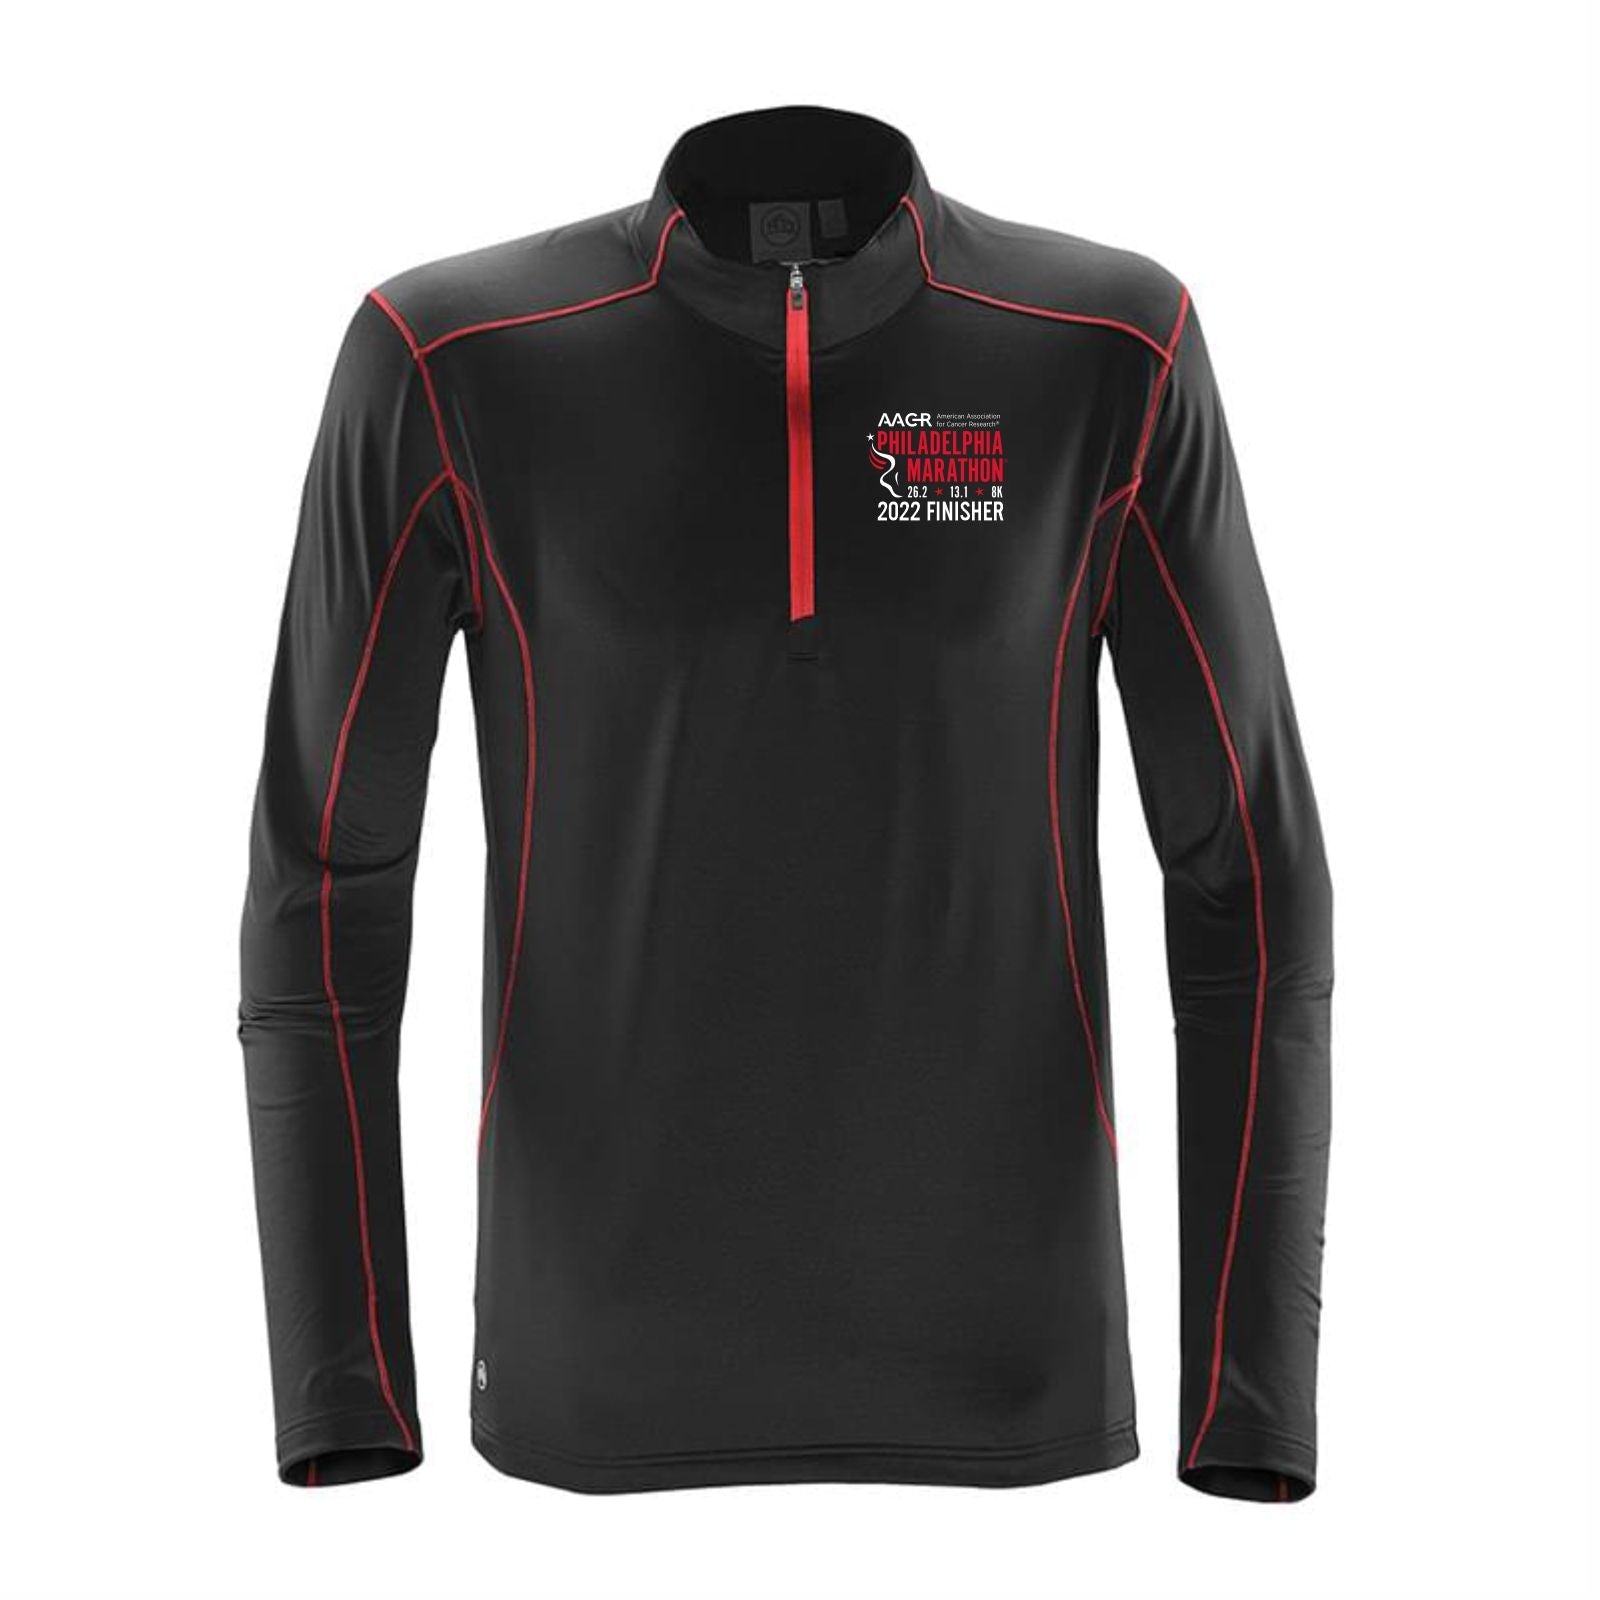 Men's Tech Fleece 1/4 Zip -Black/Bright Red- AACR 2022 Finisher Embroidery